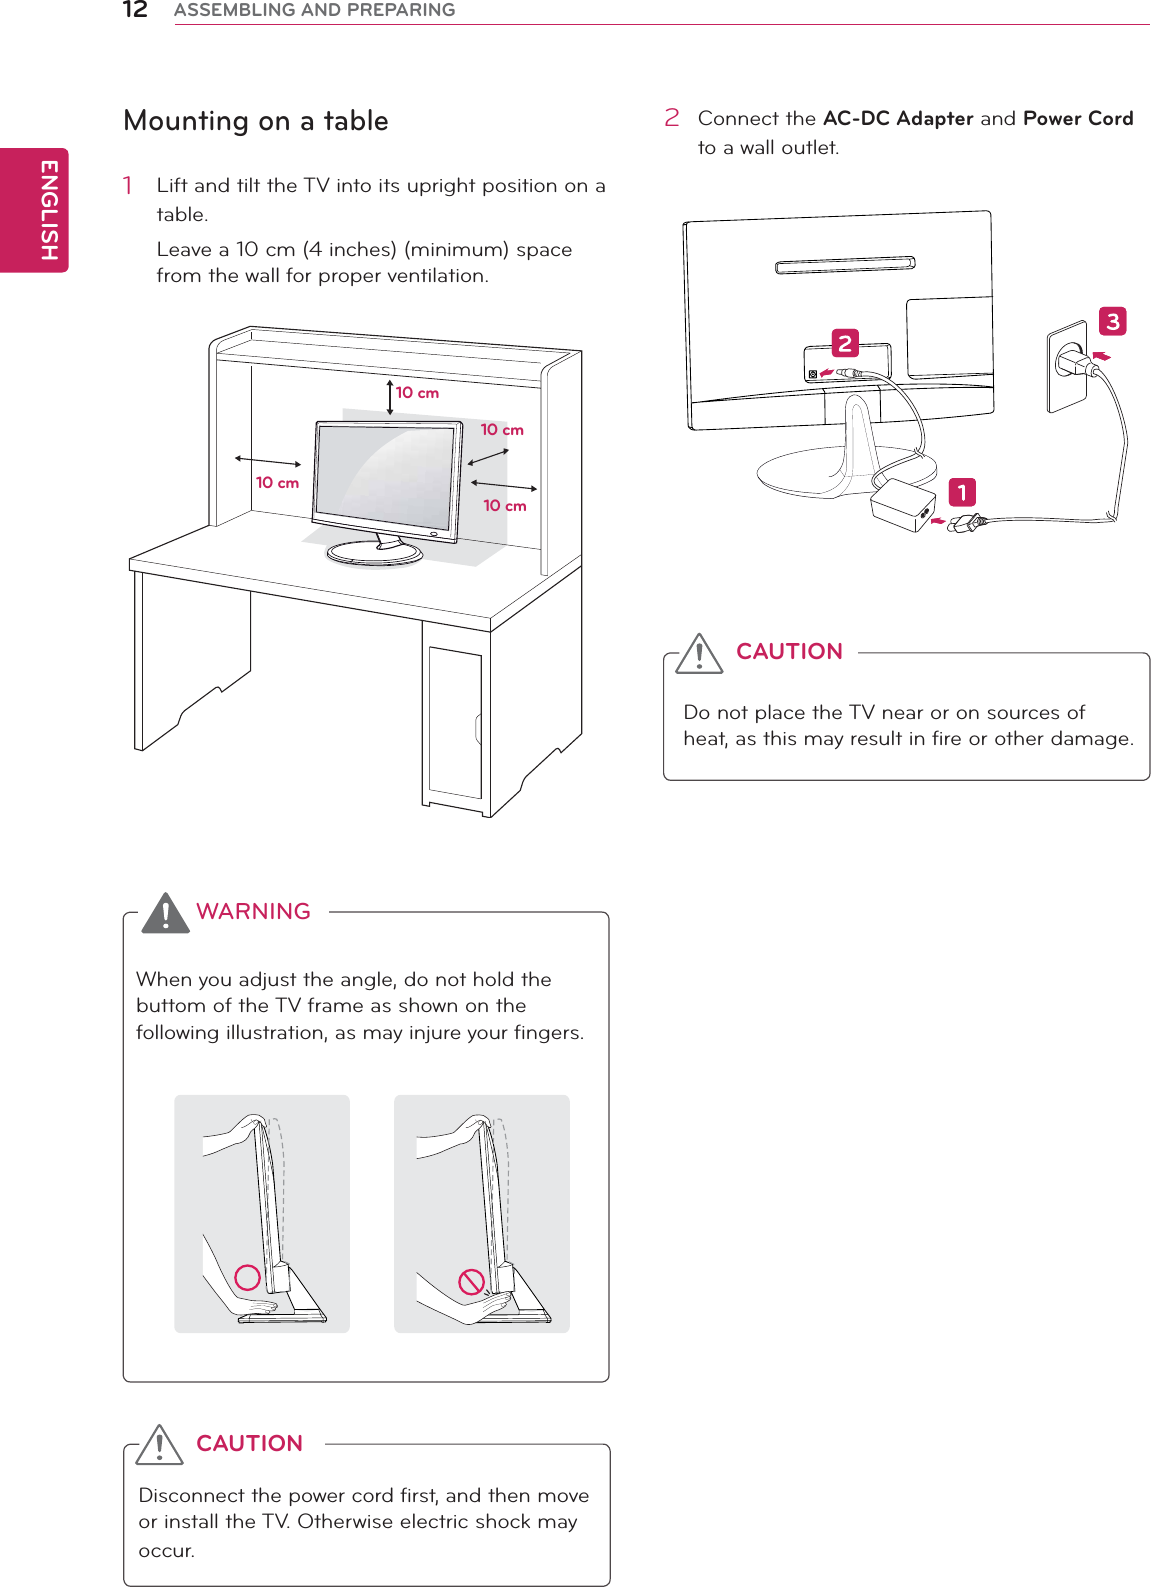 ENGLISH12 ASSEMBLING AND PREPARINGMounting on a table1  Lift and tilt the TV into its upright position on a table.Leave a 10 cm (4 inches) (minimum) space from the wall for proper ventilation.2 Connect the AC-DC Adapter and Power Cord to a wall outlet.Do not place the TV near or on sources of heat, as this may result in fire or other damage.CAUTIONWhen you adjust the angle, do not hold the buttom of the TV frame as shown on the following illustration, as may injure your fingers.WARNINGDisconnect the power cord first, and then move or install the TV. Otherwise electric shock may occur.CAUTION10 cm10 cm10 cm10 cm